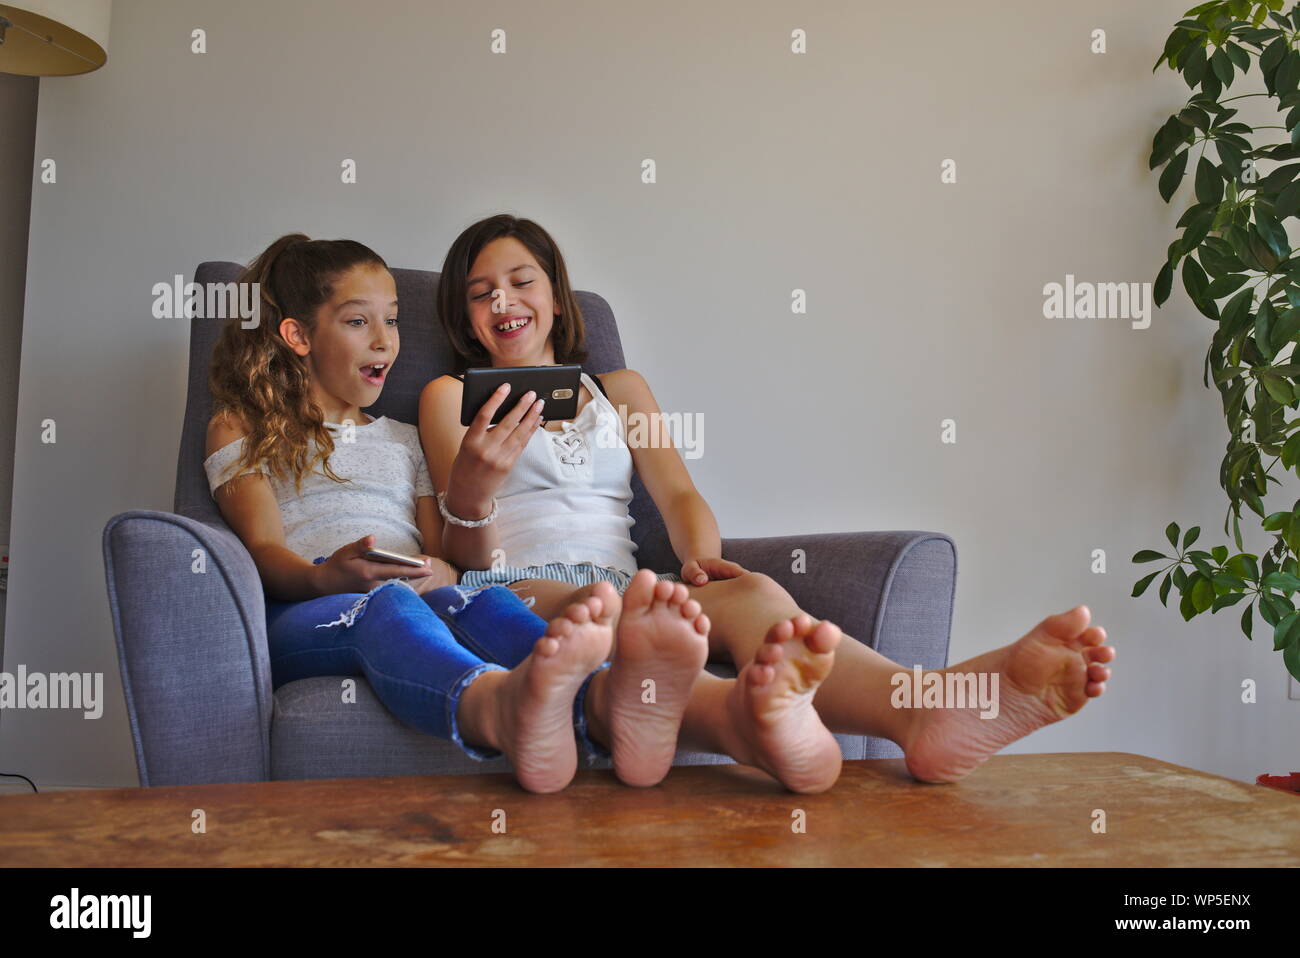 Two sisters watching videos on a smartphone together. Stock Photo